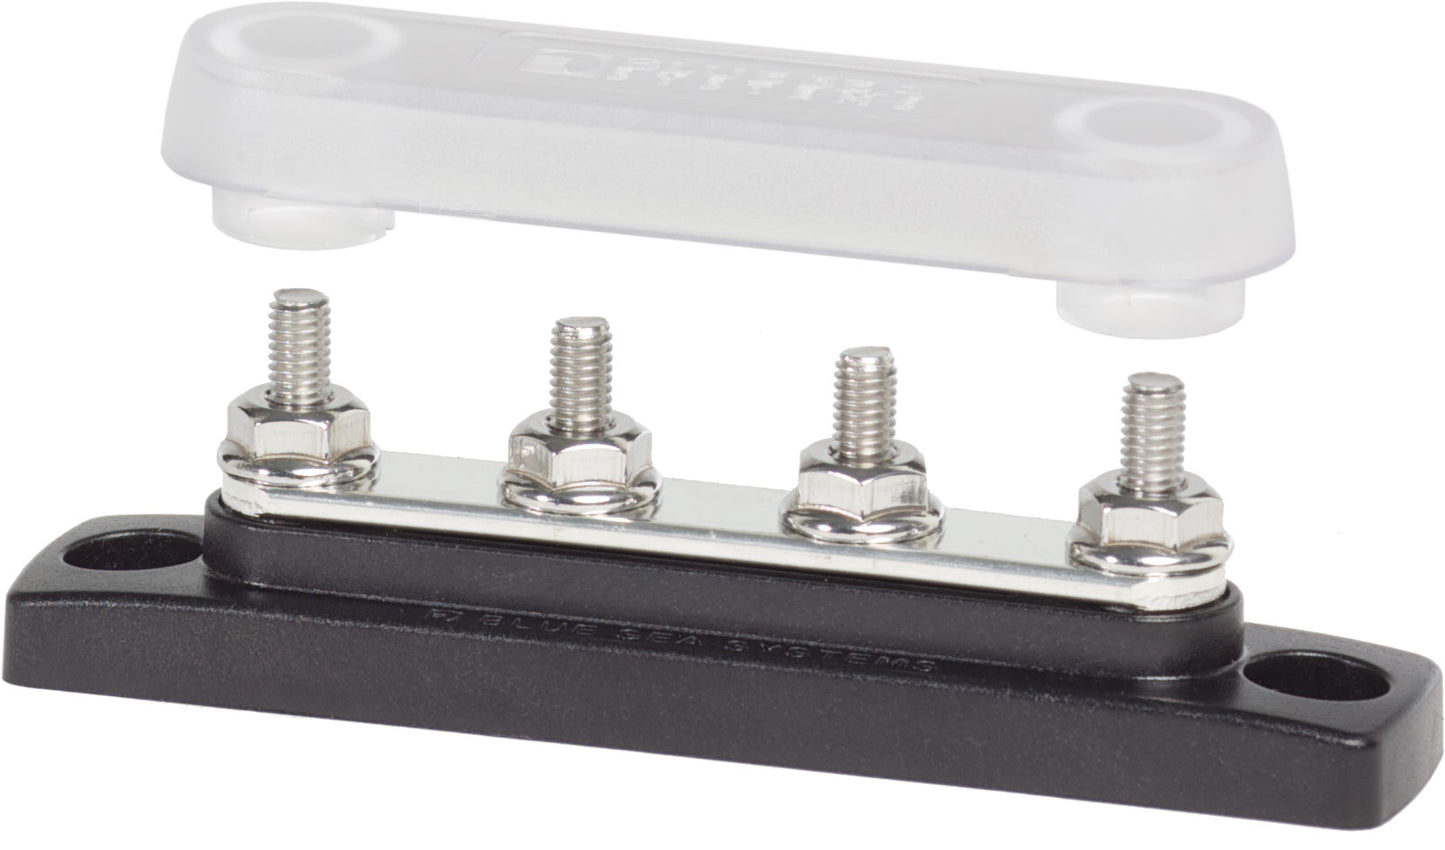 Blue Sea 2315 MiniBus 100 Ampere Common BusBar 4 x 10-32 Stud Terminal with Cover [2315]